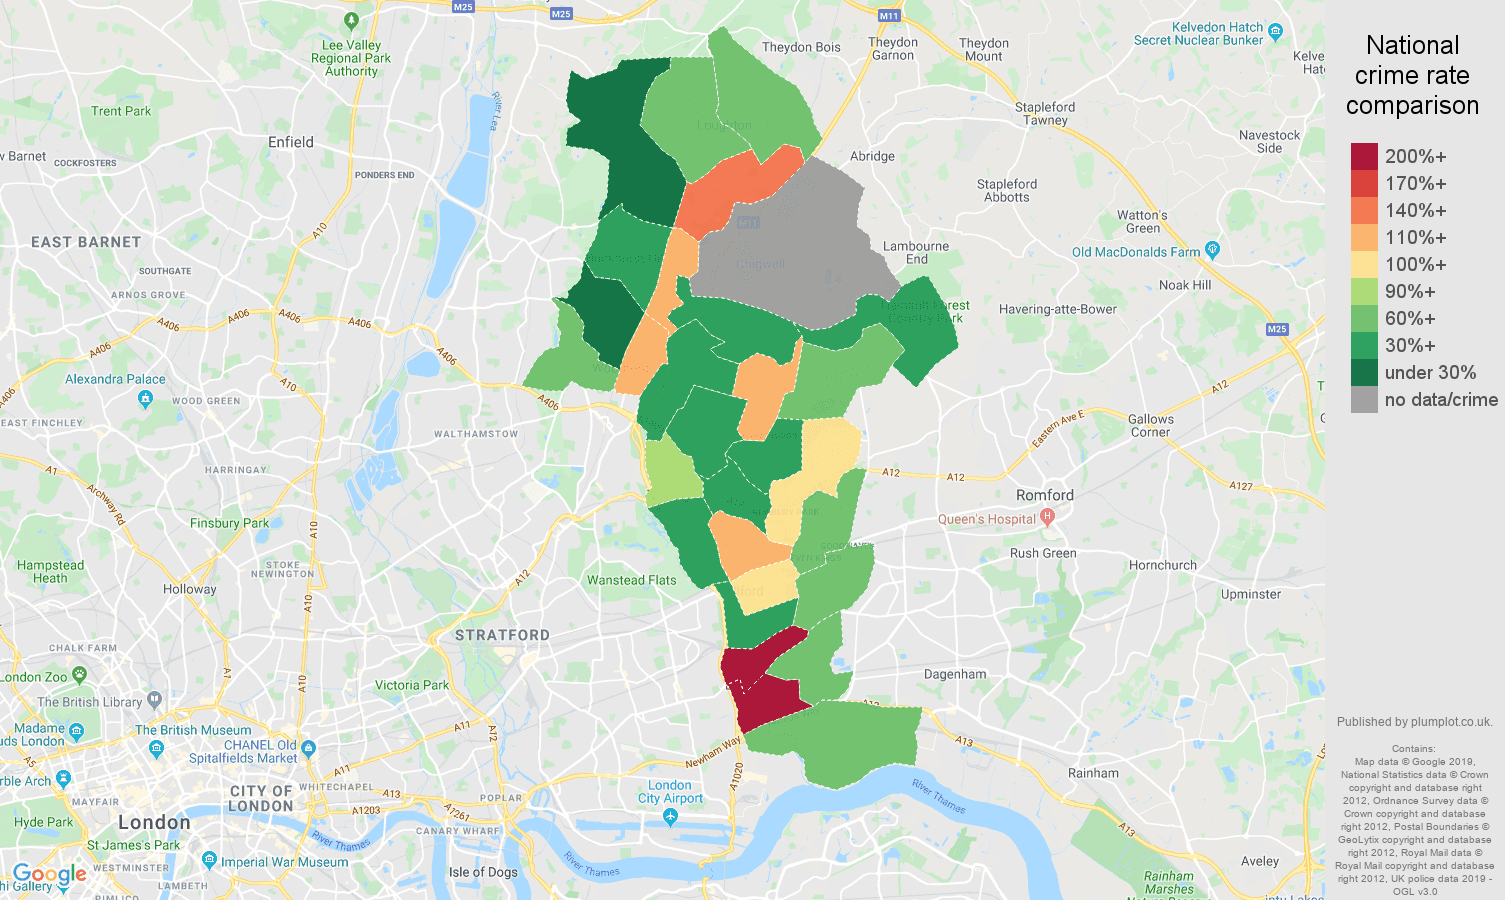 Ilford possession of weapons crime rate comparison map